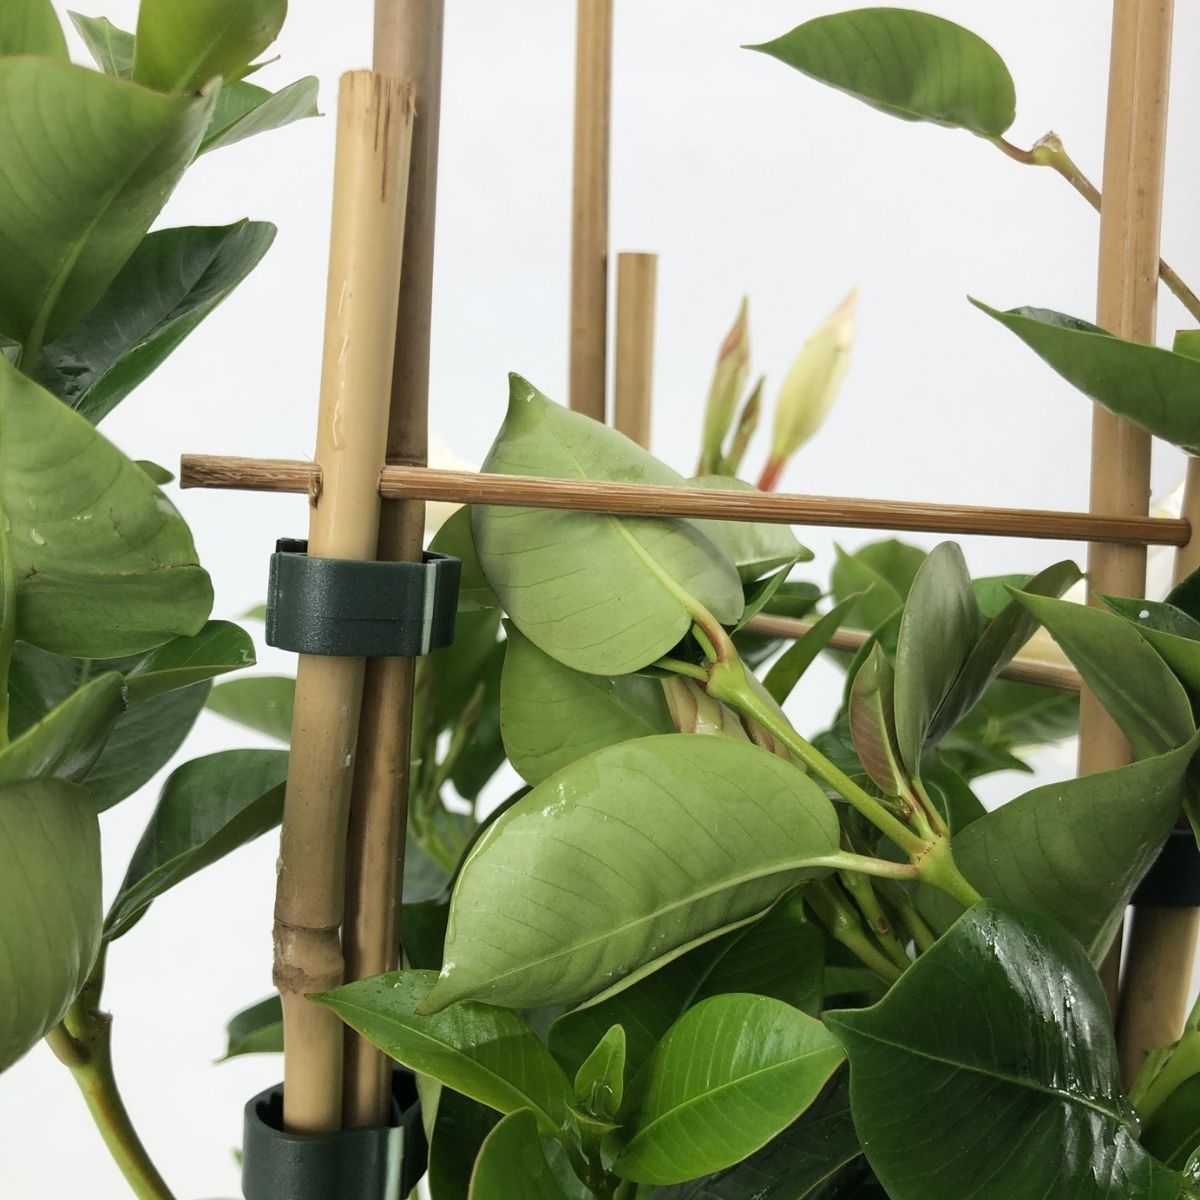 Mandevilla climbing set with bamboo rack, plastic clips and green leaves